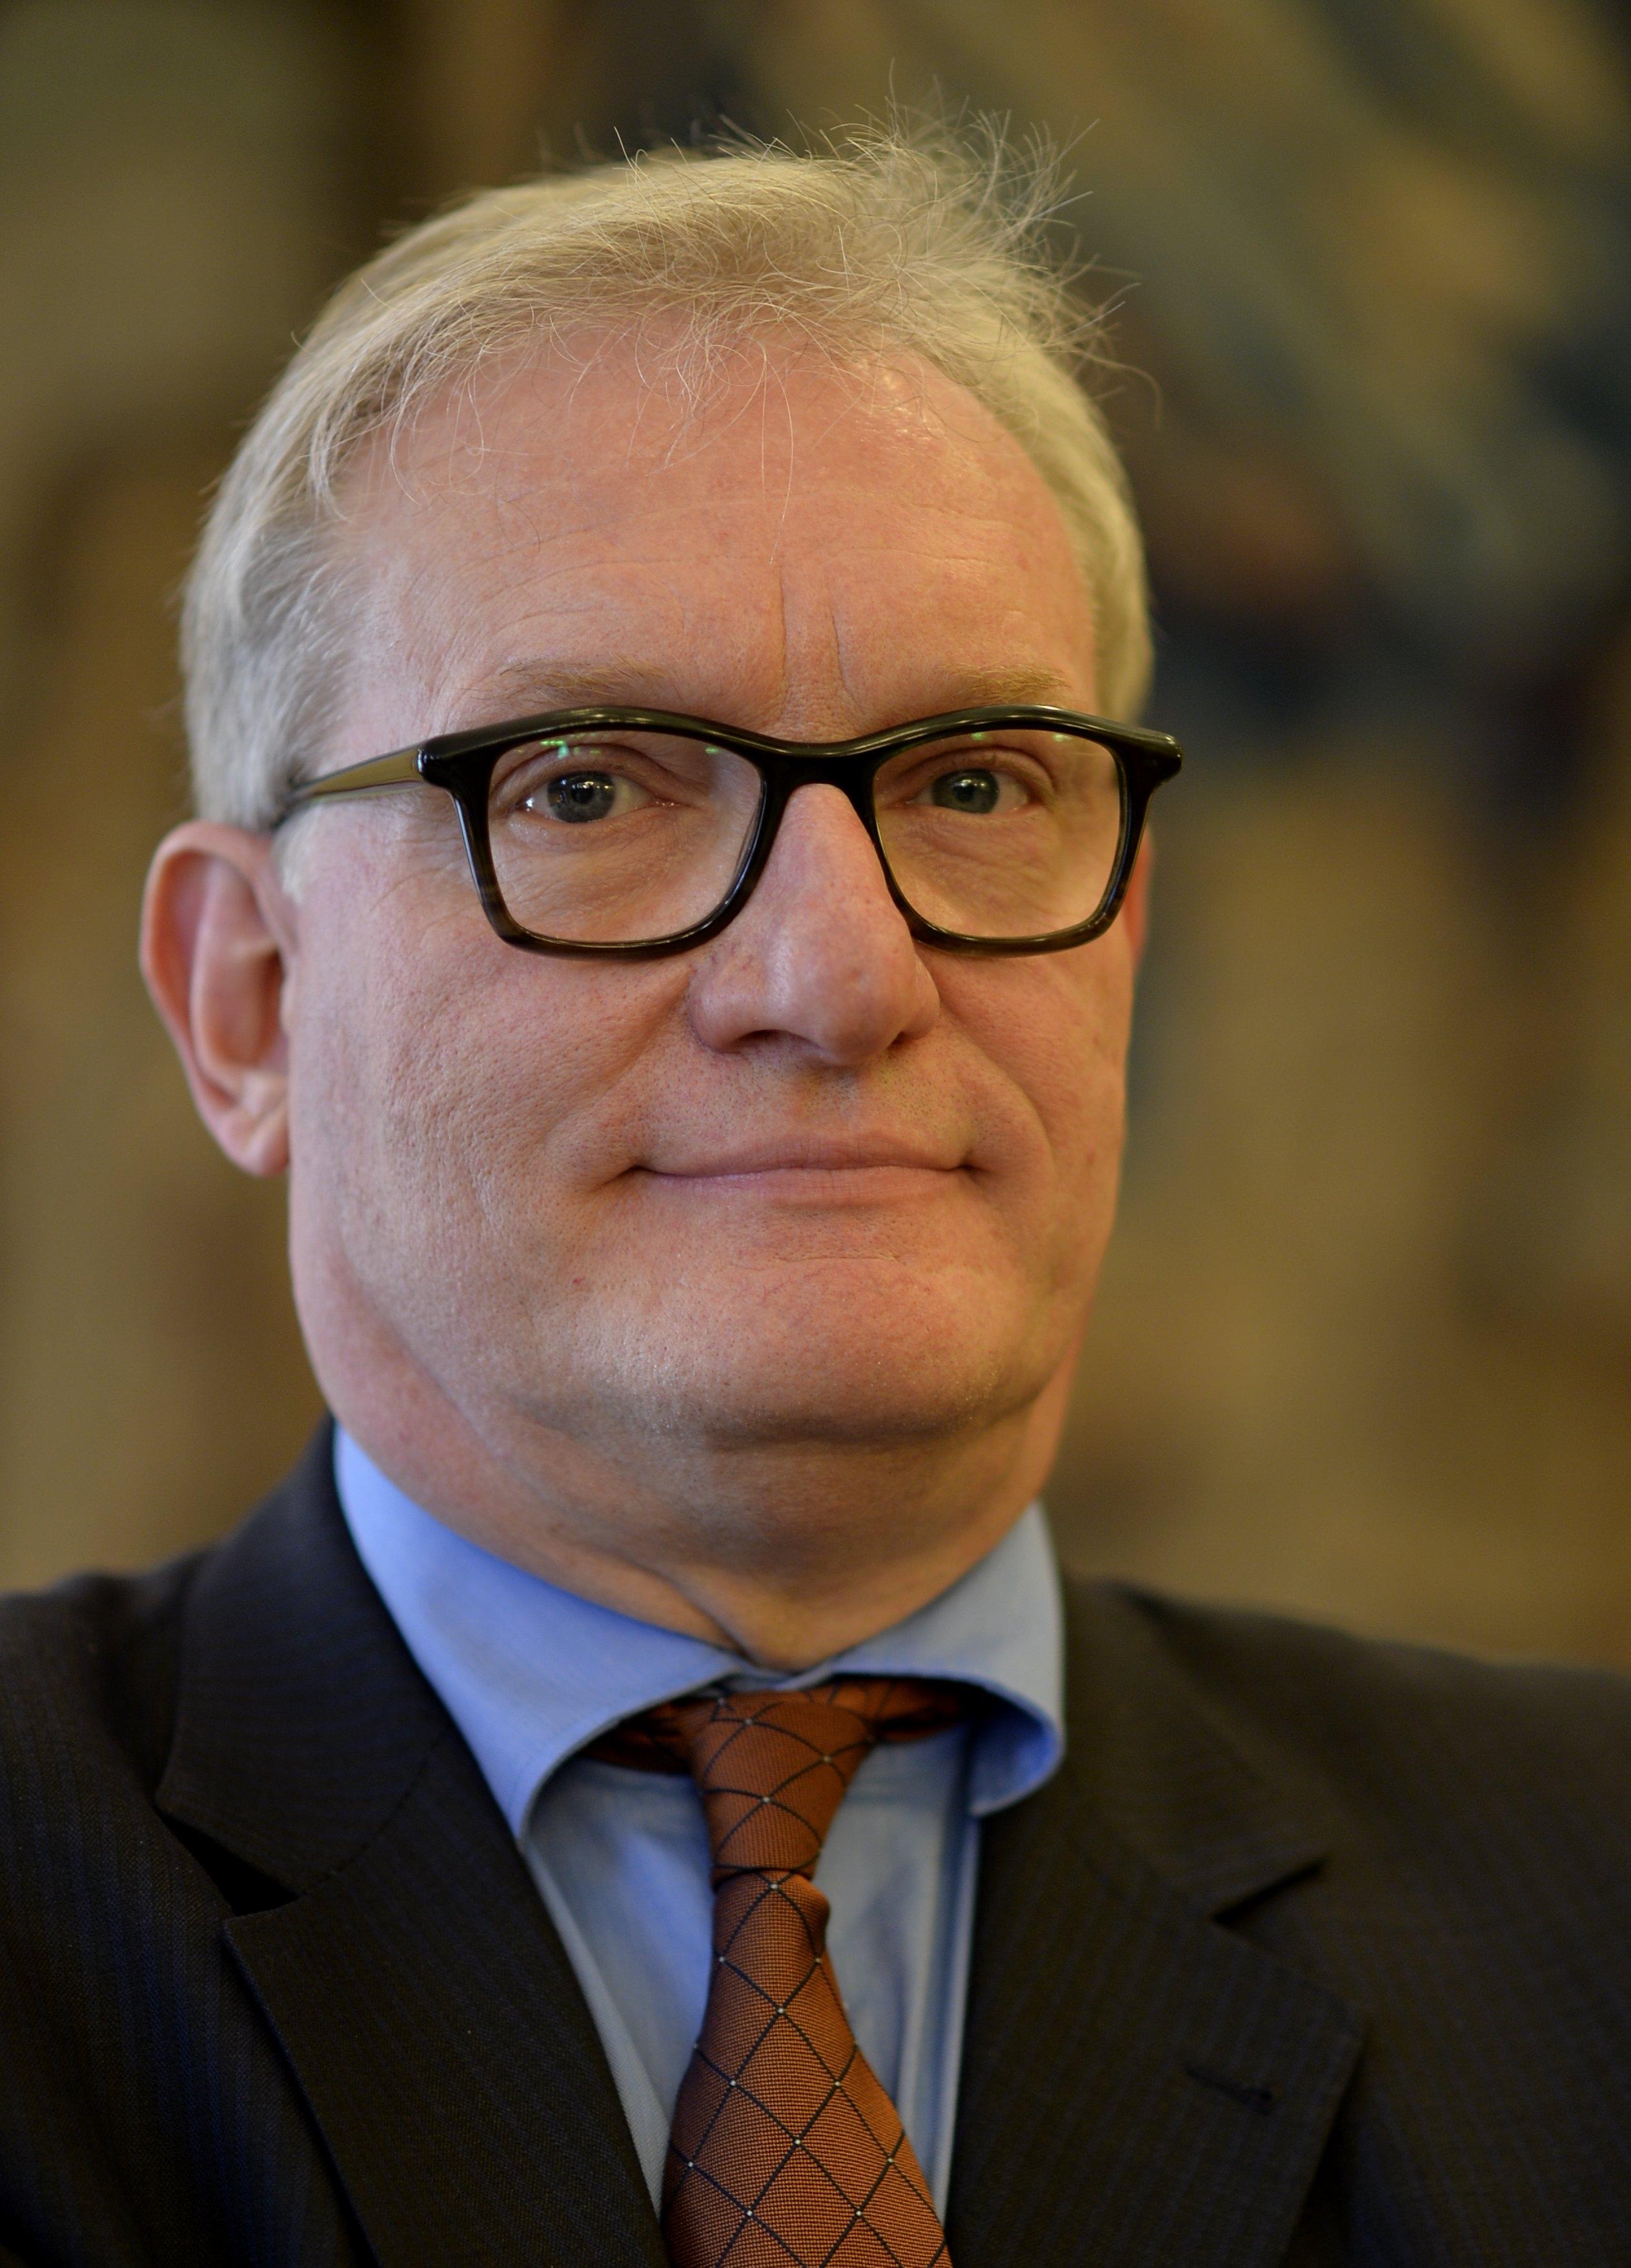 20150310 - BRUSSELS, BELGIUM: Pol Van Den Driessche (N-VA) pictured at a reception organized by the Belgian group of the IPU, Inter-Parliamentary Union, at the federal parliament in Brussels , Tuesday 10 March 2015. BELGA PHOTO ERIC LALMAND